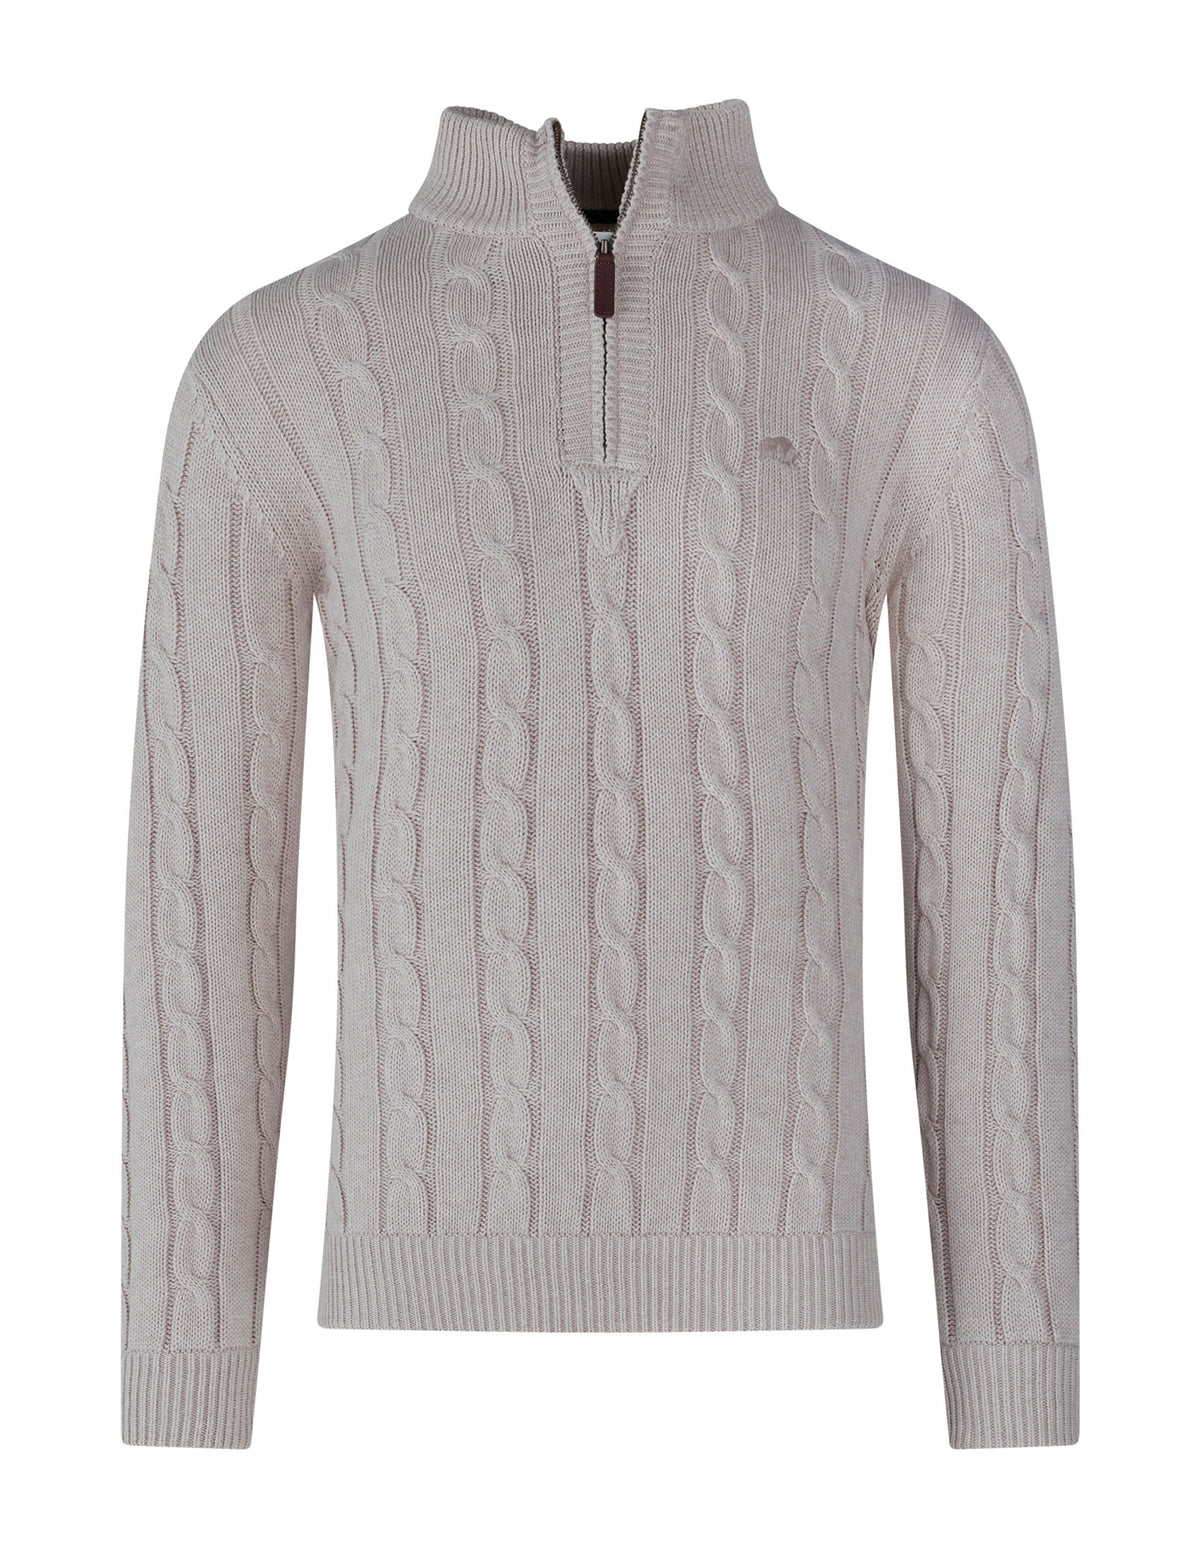 Chunky Cable Knit Quarter Zip - Oatmeal